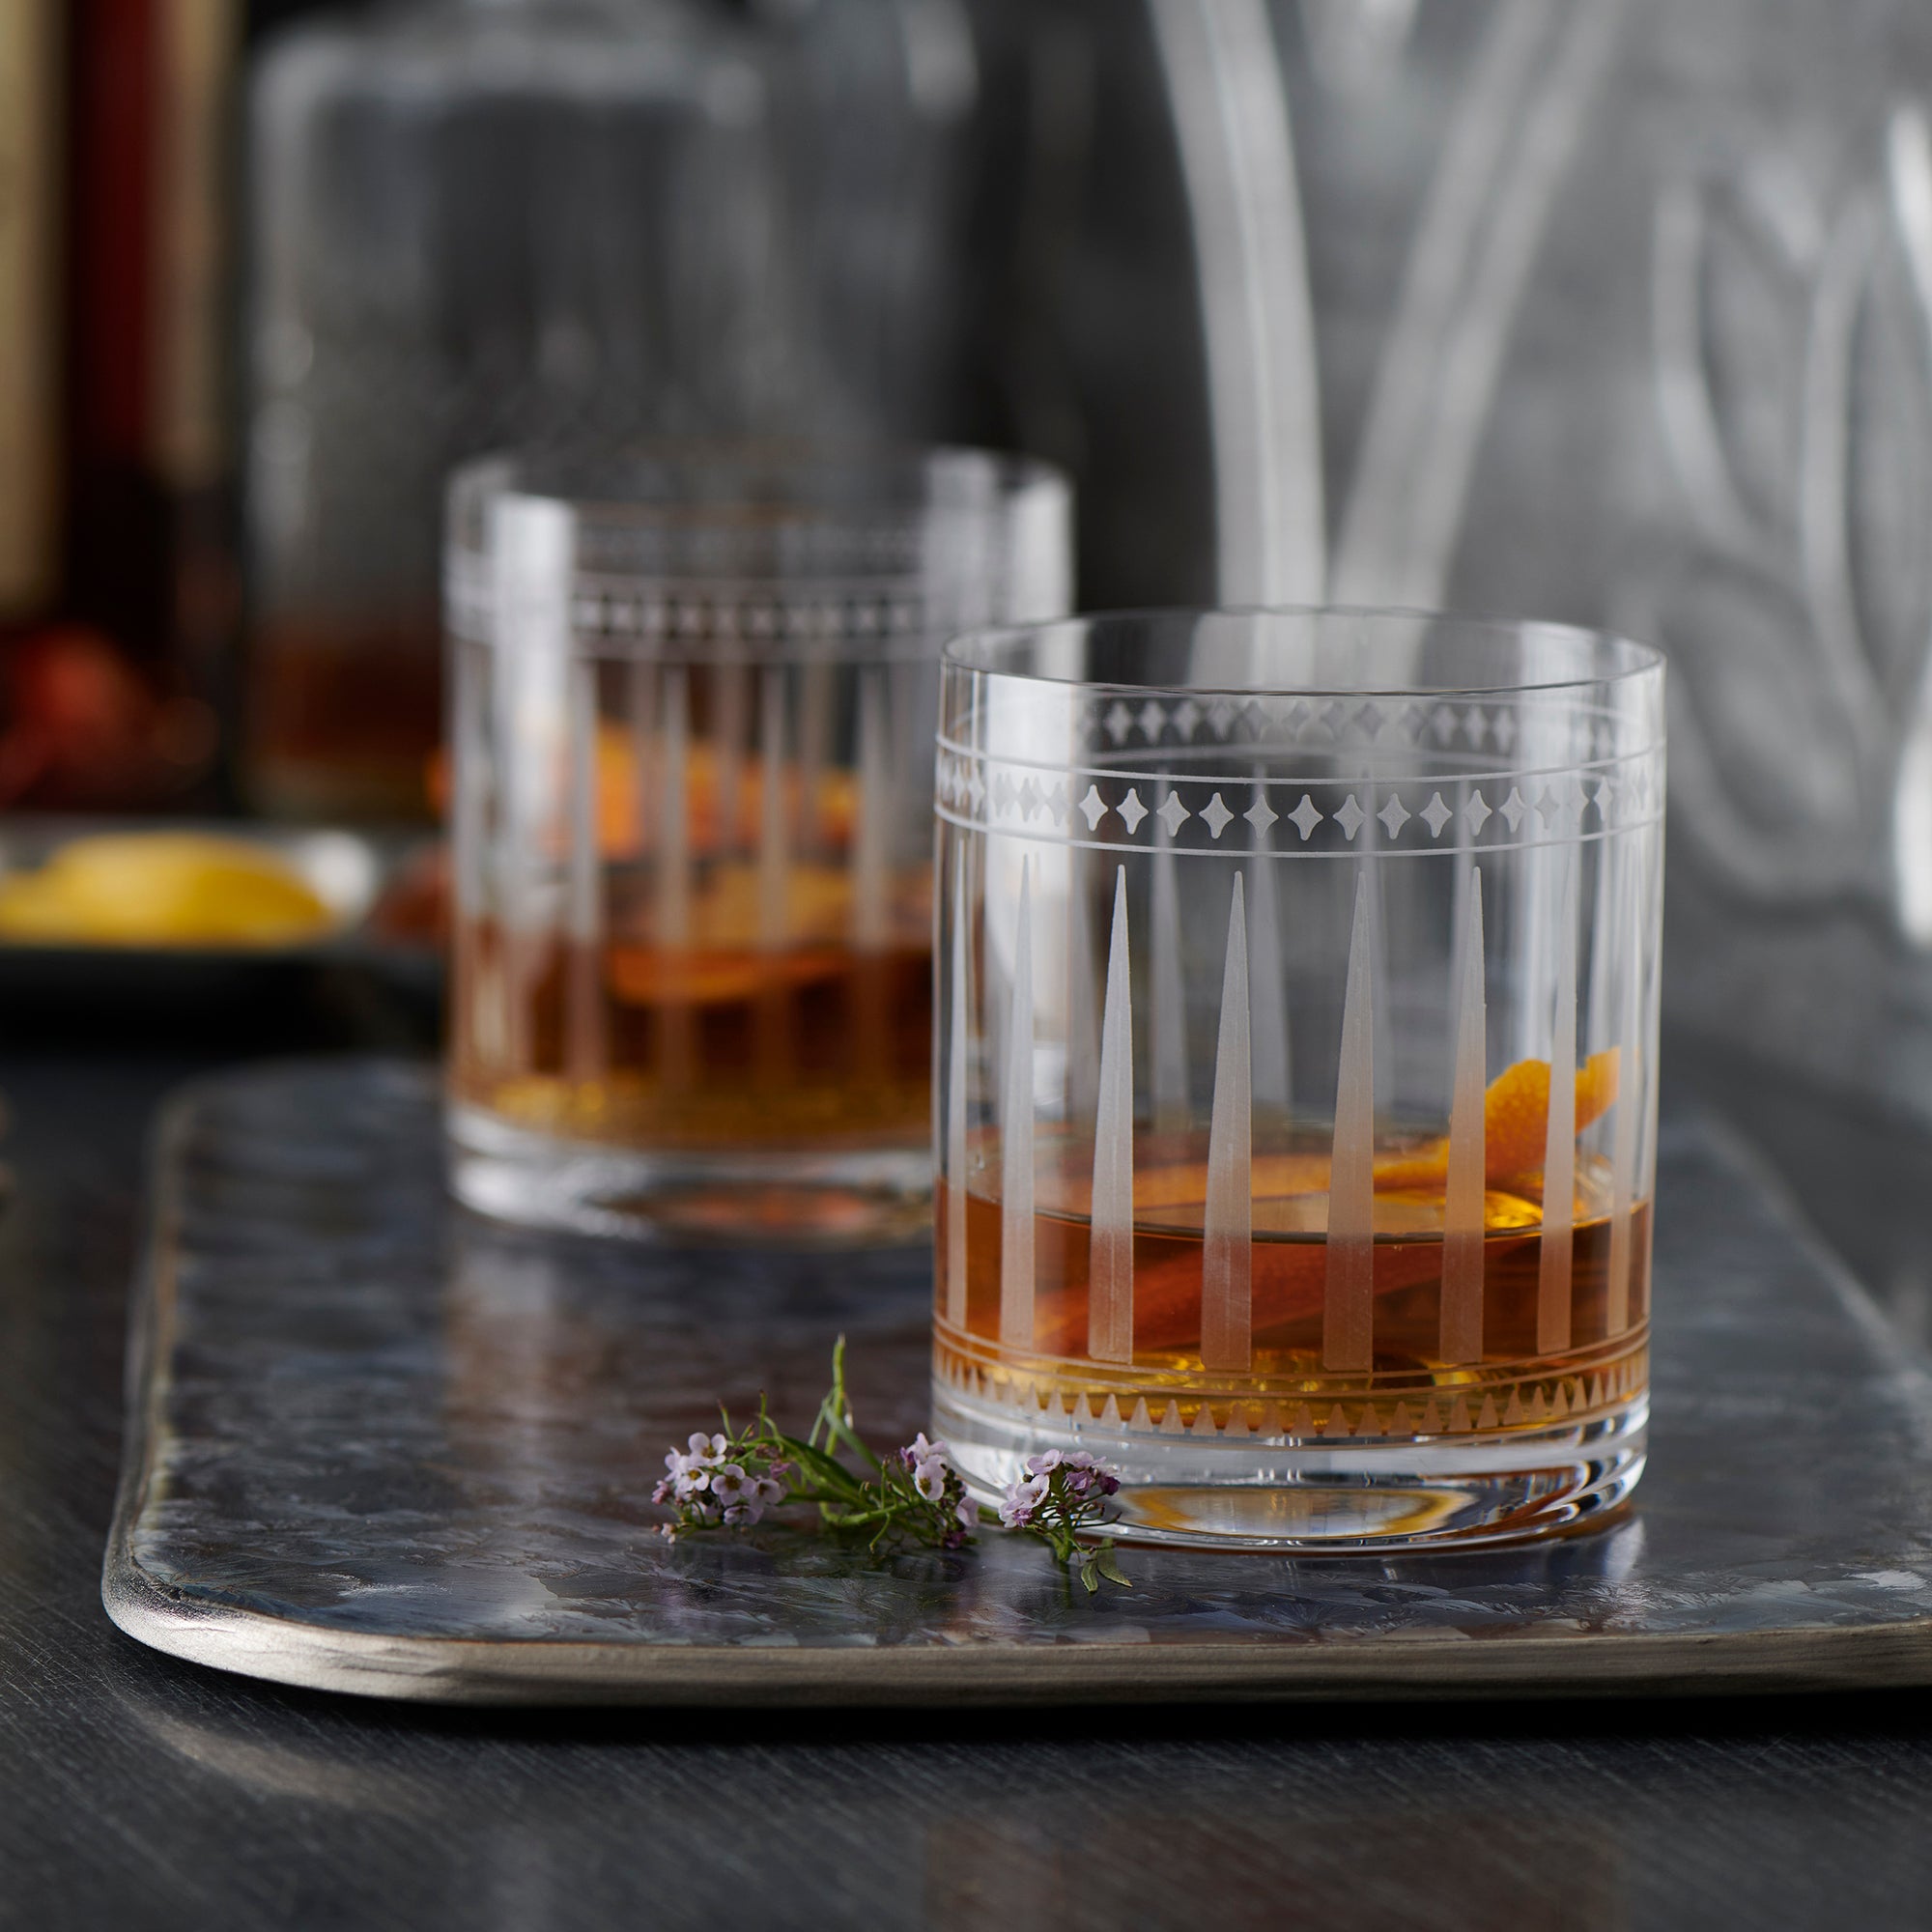 Two clear glass tumblers, crafted using the sand-etching technique, feature geometric etched patterns and a reflective surface. These Marrakech Rocks Glasses from Caskata Artisanal Home evoke an Art Deco crystal design.